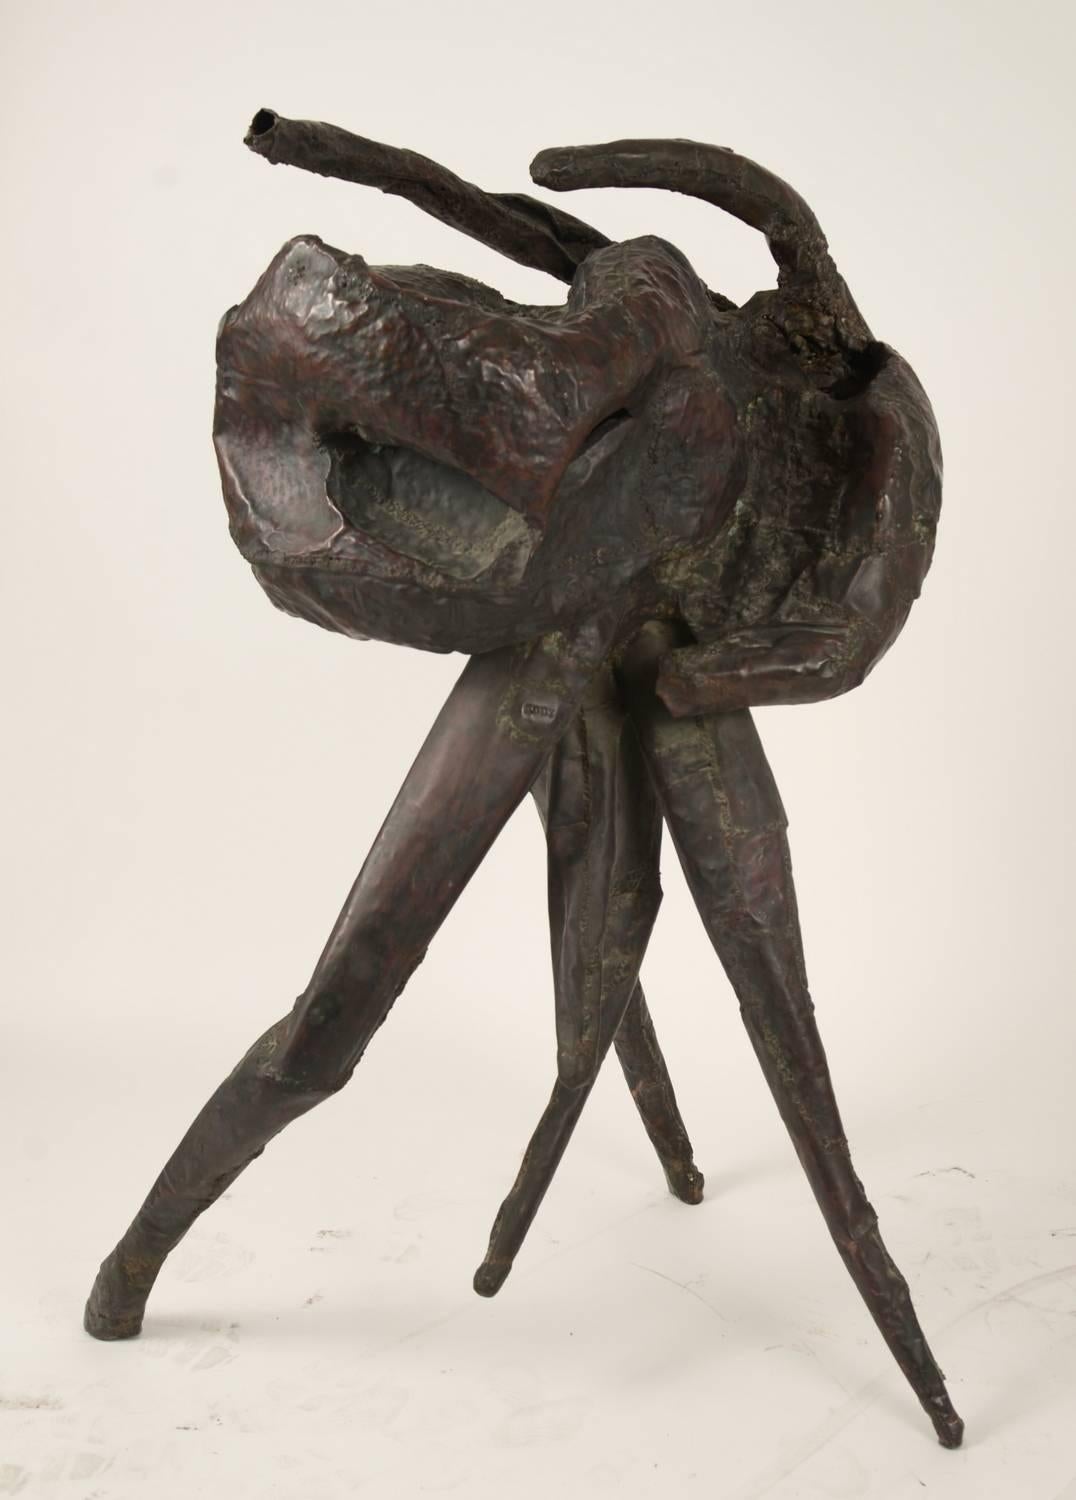 Brutalist copper sculptural figure entitled Eddy. This was found in the basement of the university of Michigan art department. The artist is unknown.

 